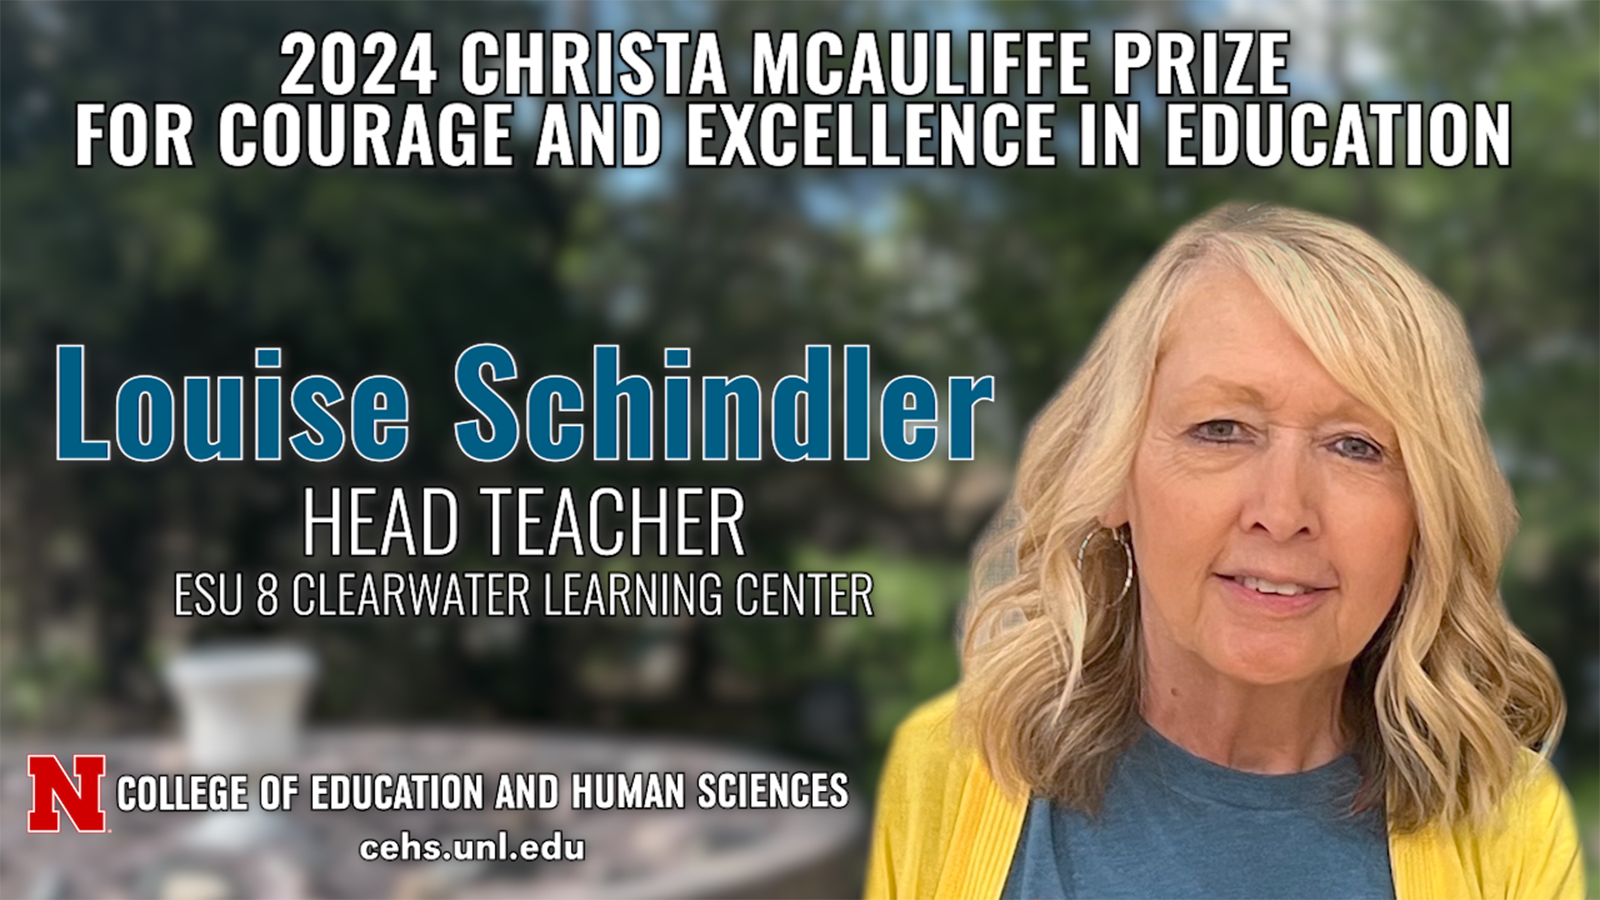 Louise Schindler, head teacher for special education at ESU8 for 48 years, is the recipient of the 2024 Christa McAuliffe Prize for Courage and Excellence in Education